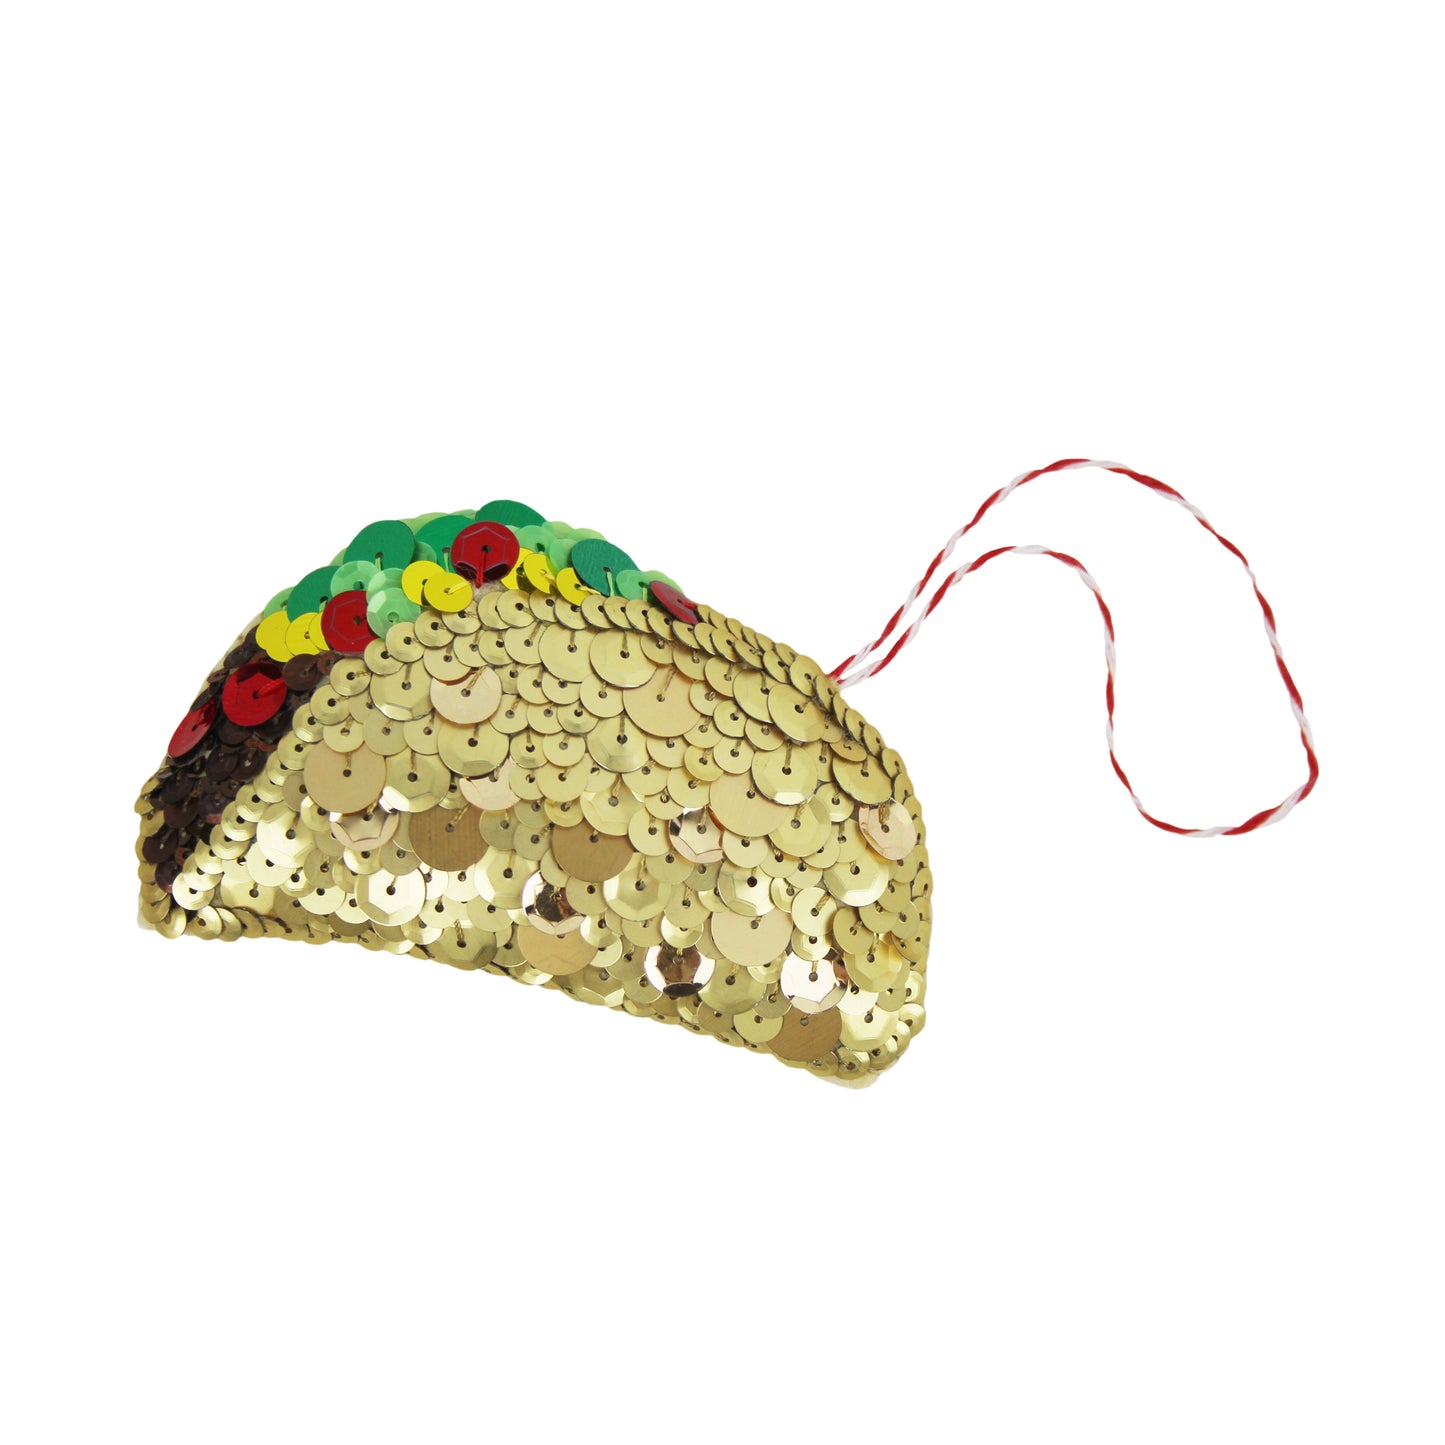 Taco Sequin Hanging Ornament, sequinned taco filled with sequinned tomato, beef, salad and cheeese